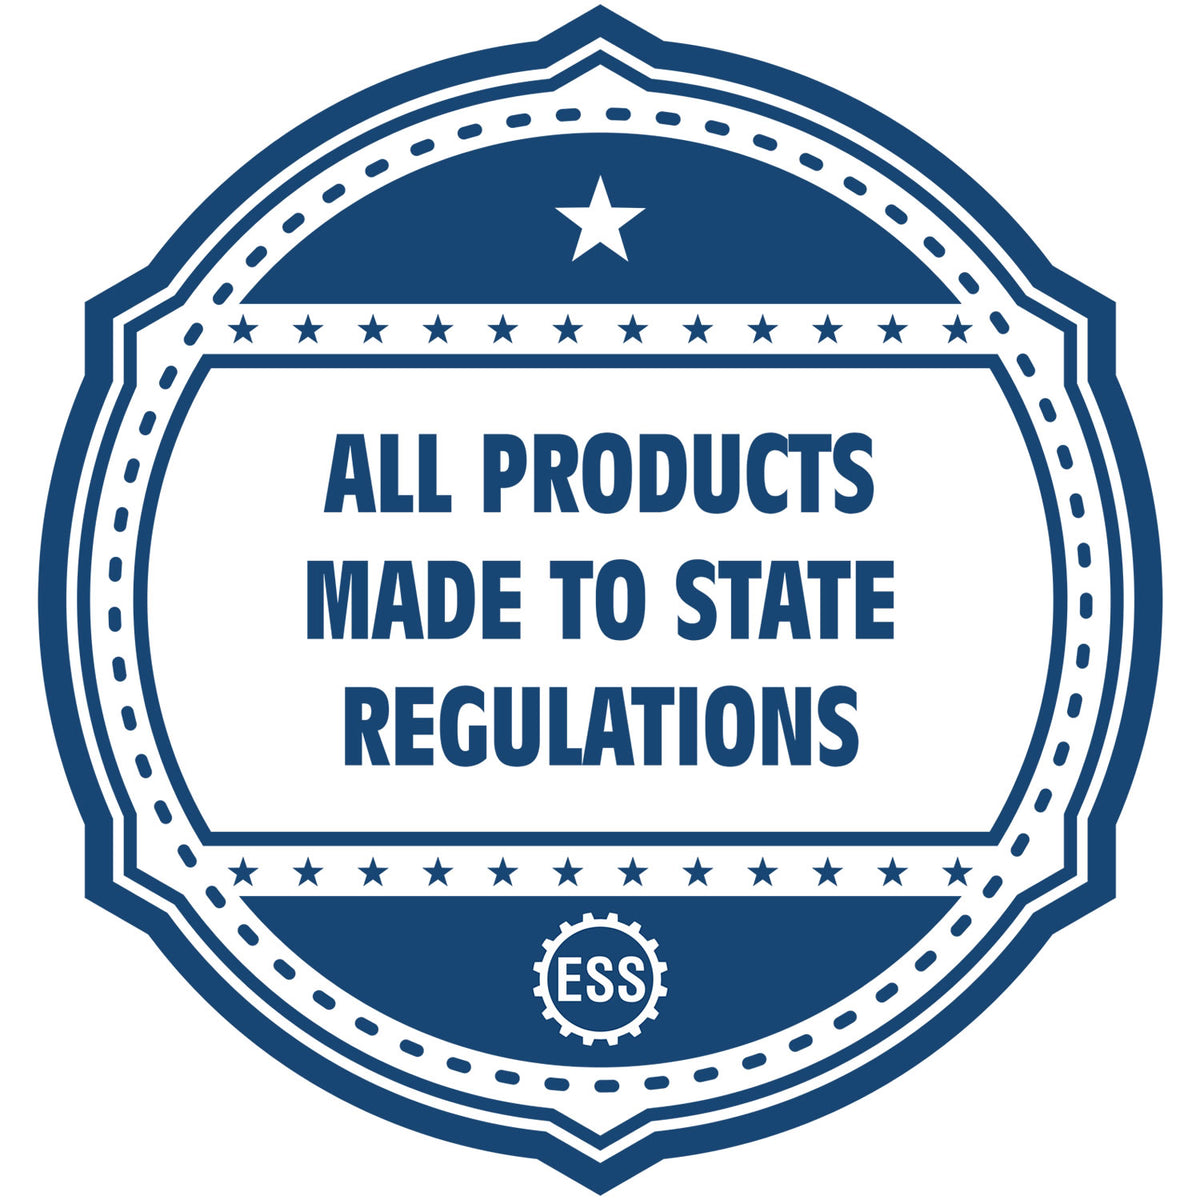 An icon or badge element for the Soft Pocket Alabama Landscape Architect Embosser showing that this product is made in compliance with state regulations.